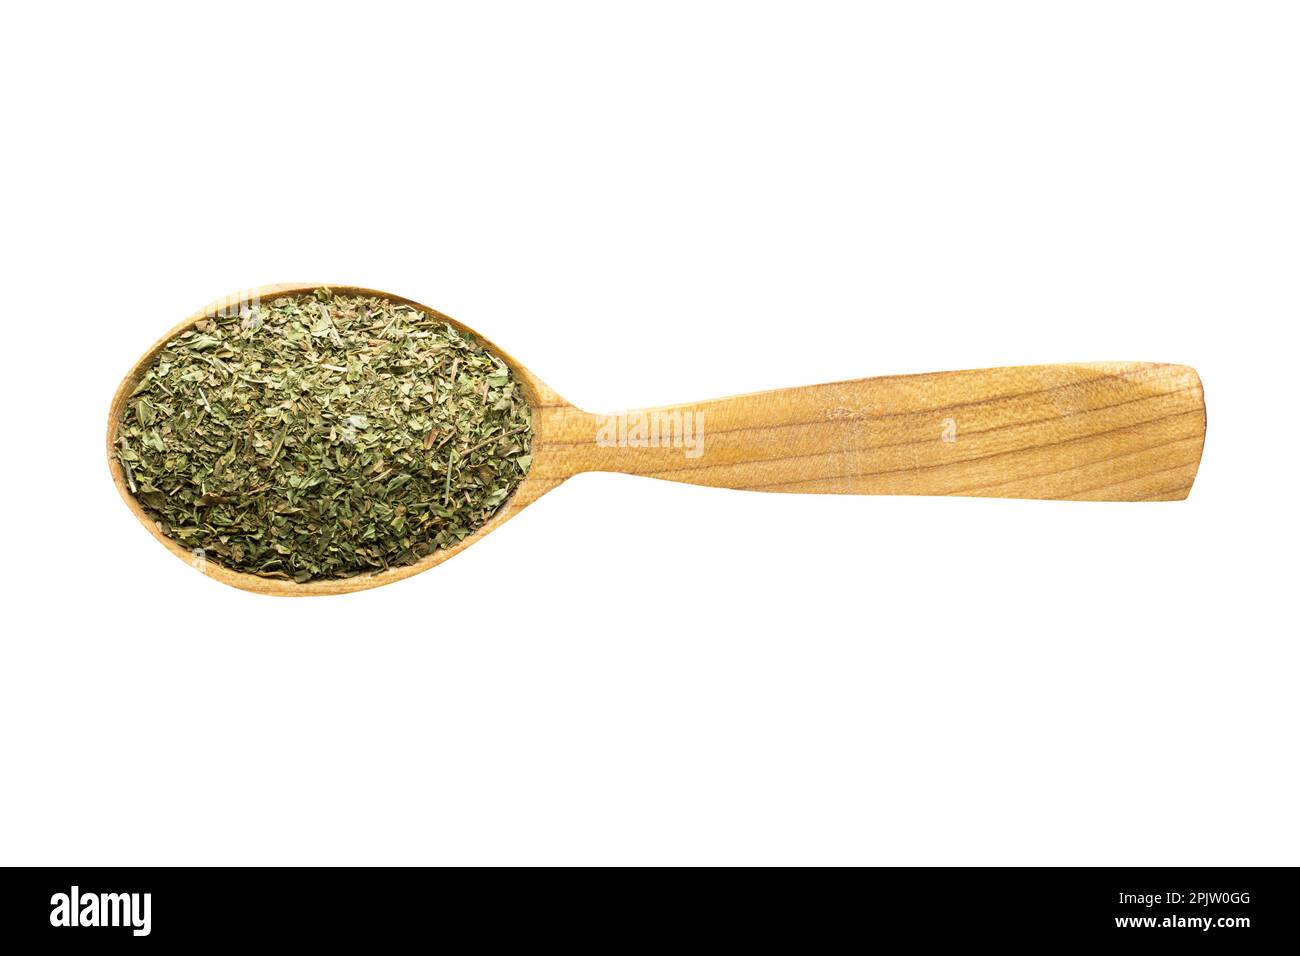 Spoon With Spices PNG Transparent Images Free Download, Vector Files